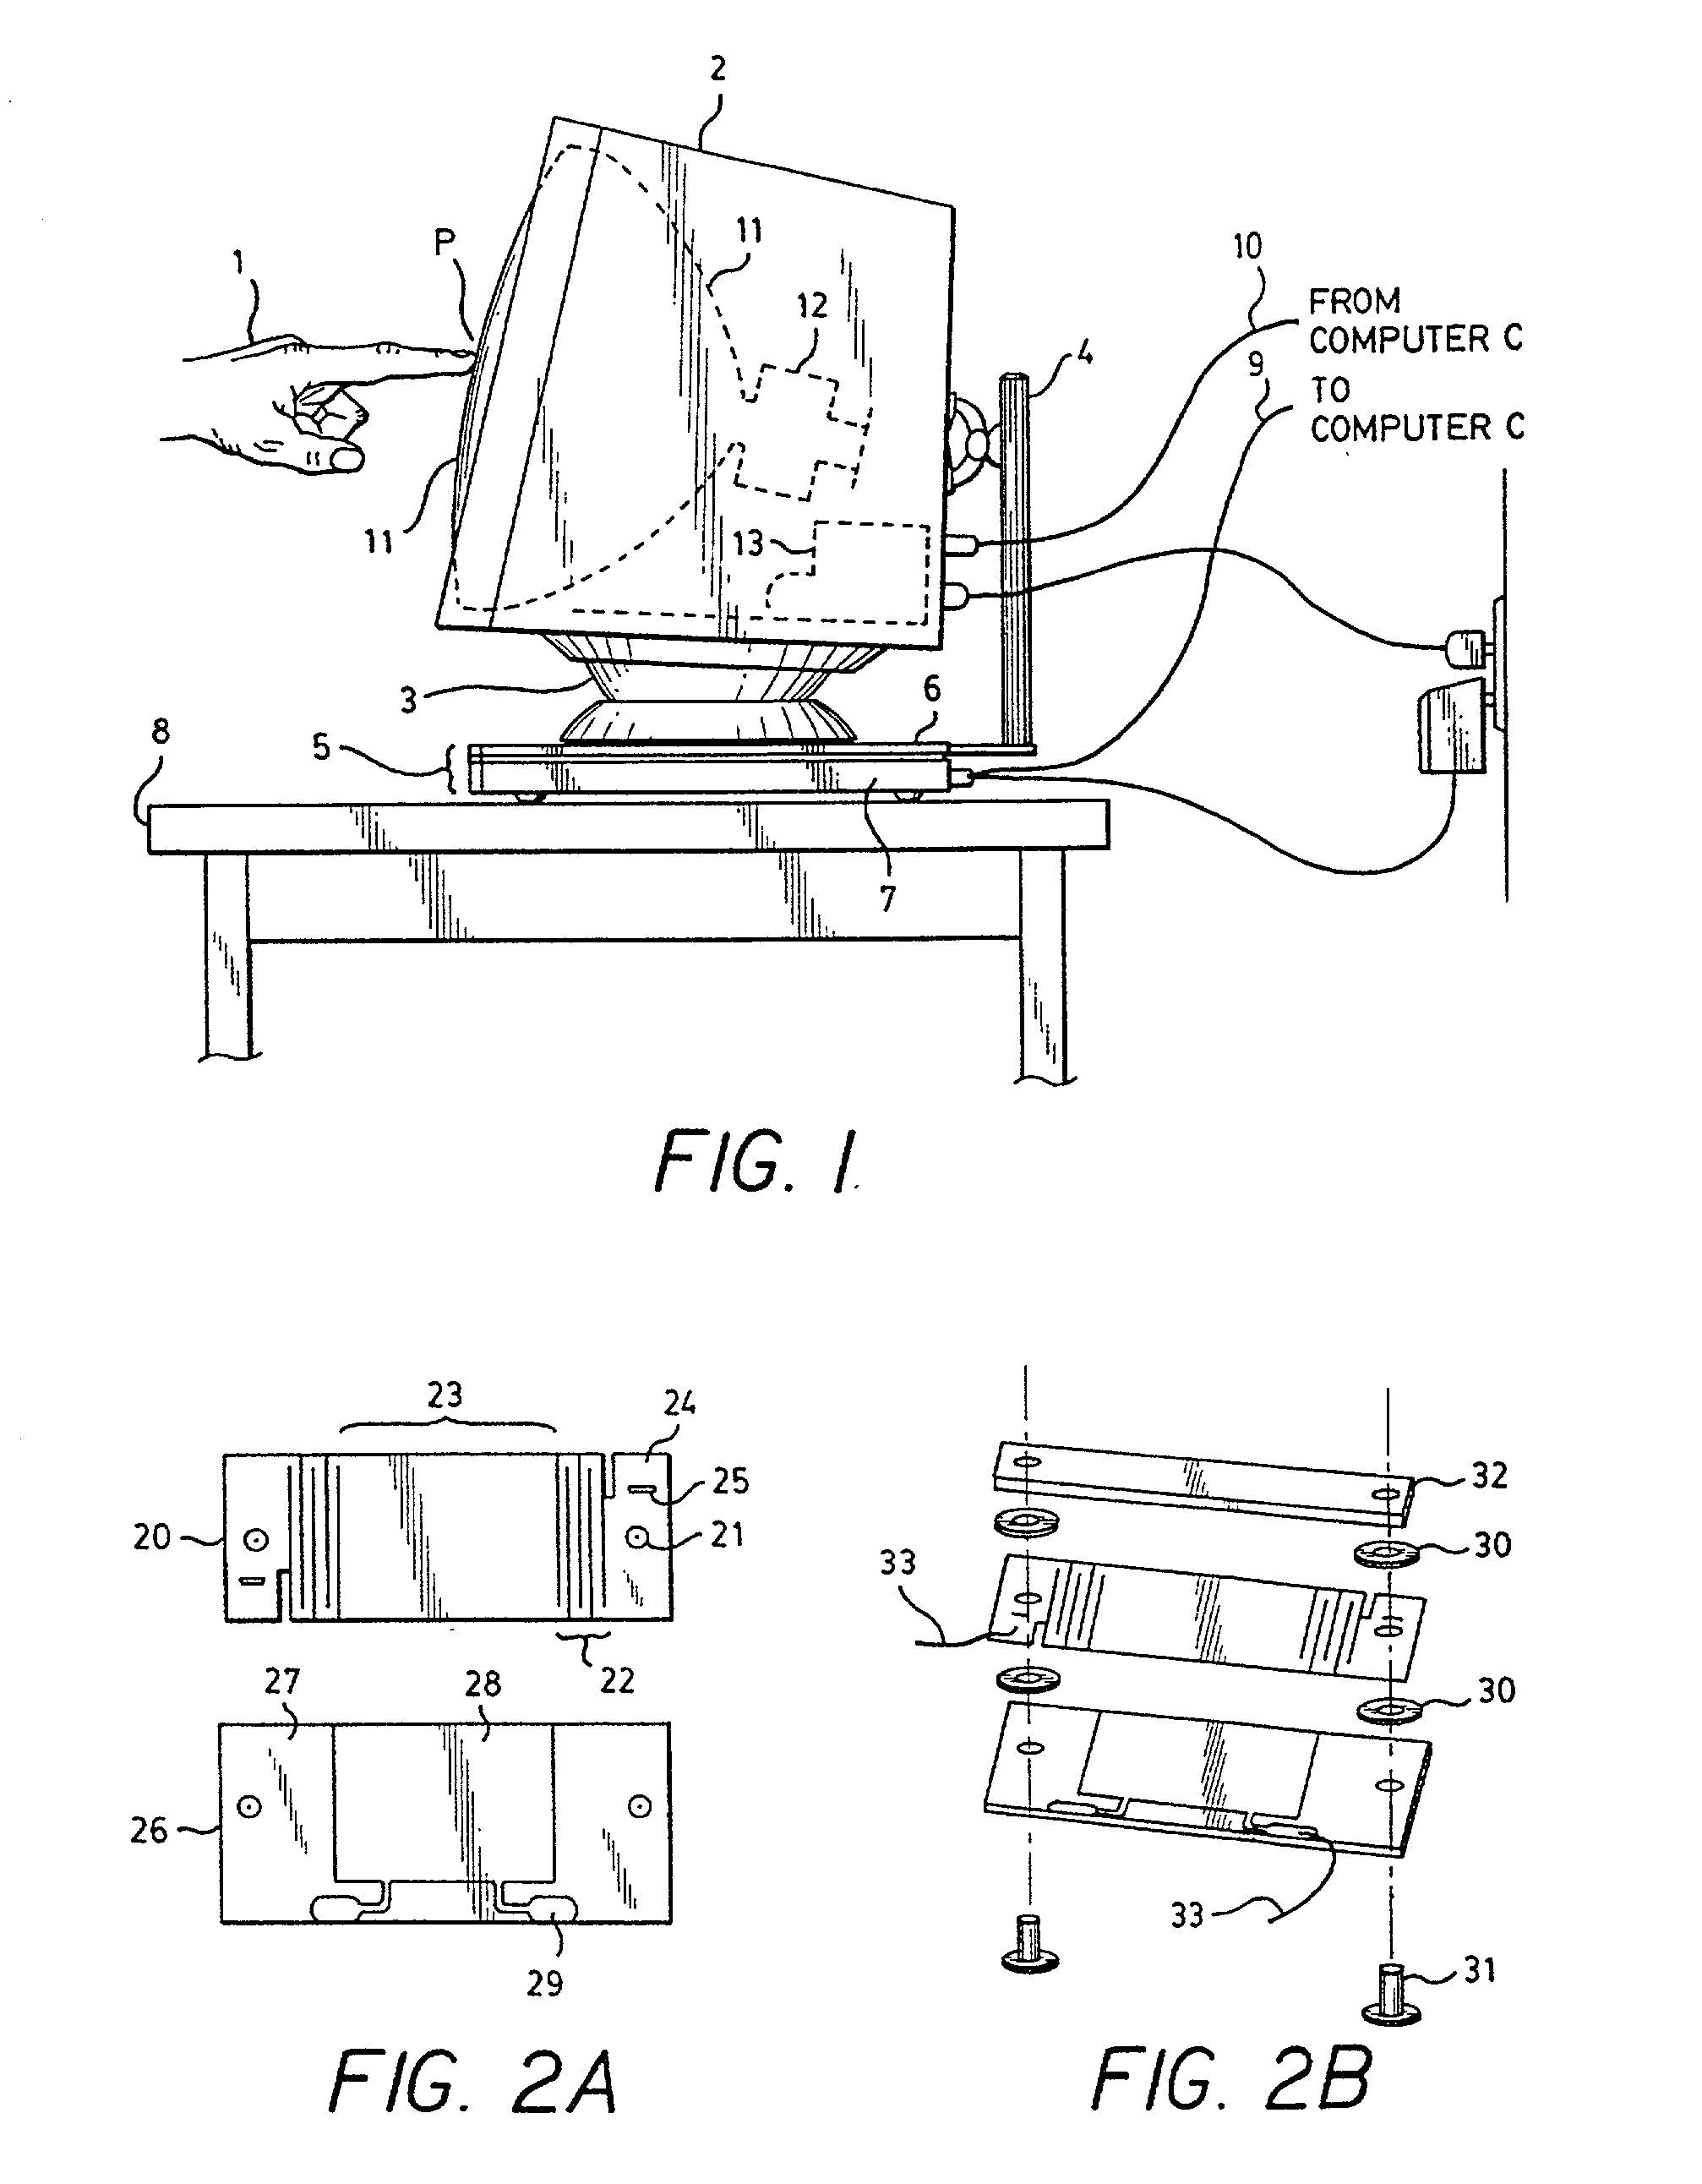 Method of and apparatus for the elimination of the effects of inertial interference in force measurement systems, including touch-input computer and related displays employing touch force location measurement techniques